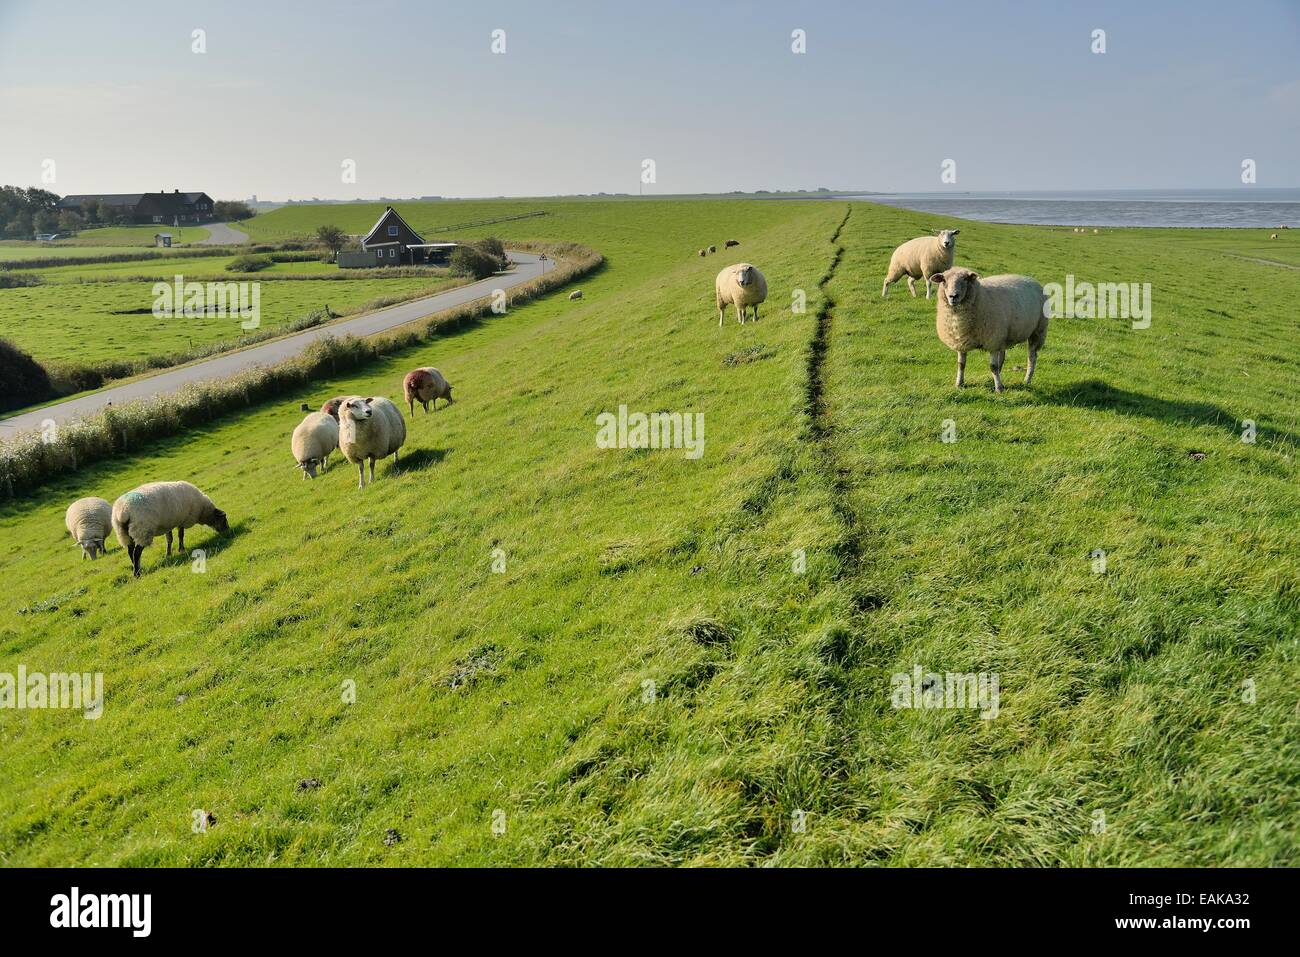 Sheep (Ovis aries) on a dike, Pellworm, North Frisia, Schleswig-Holstein, Germany Stock Photo